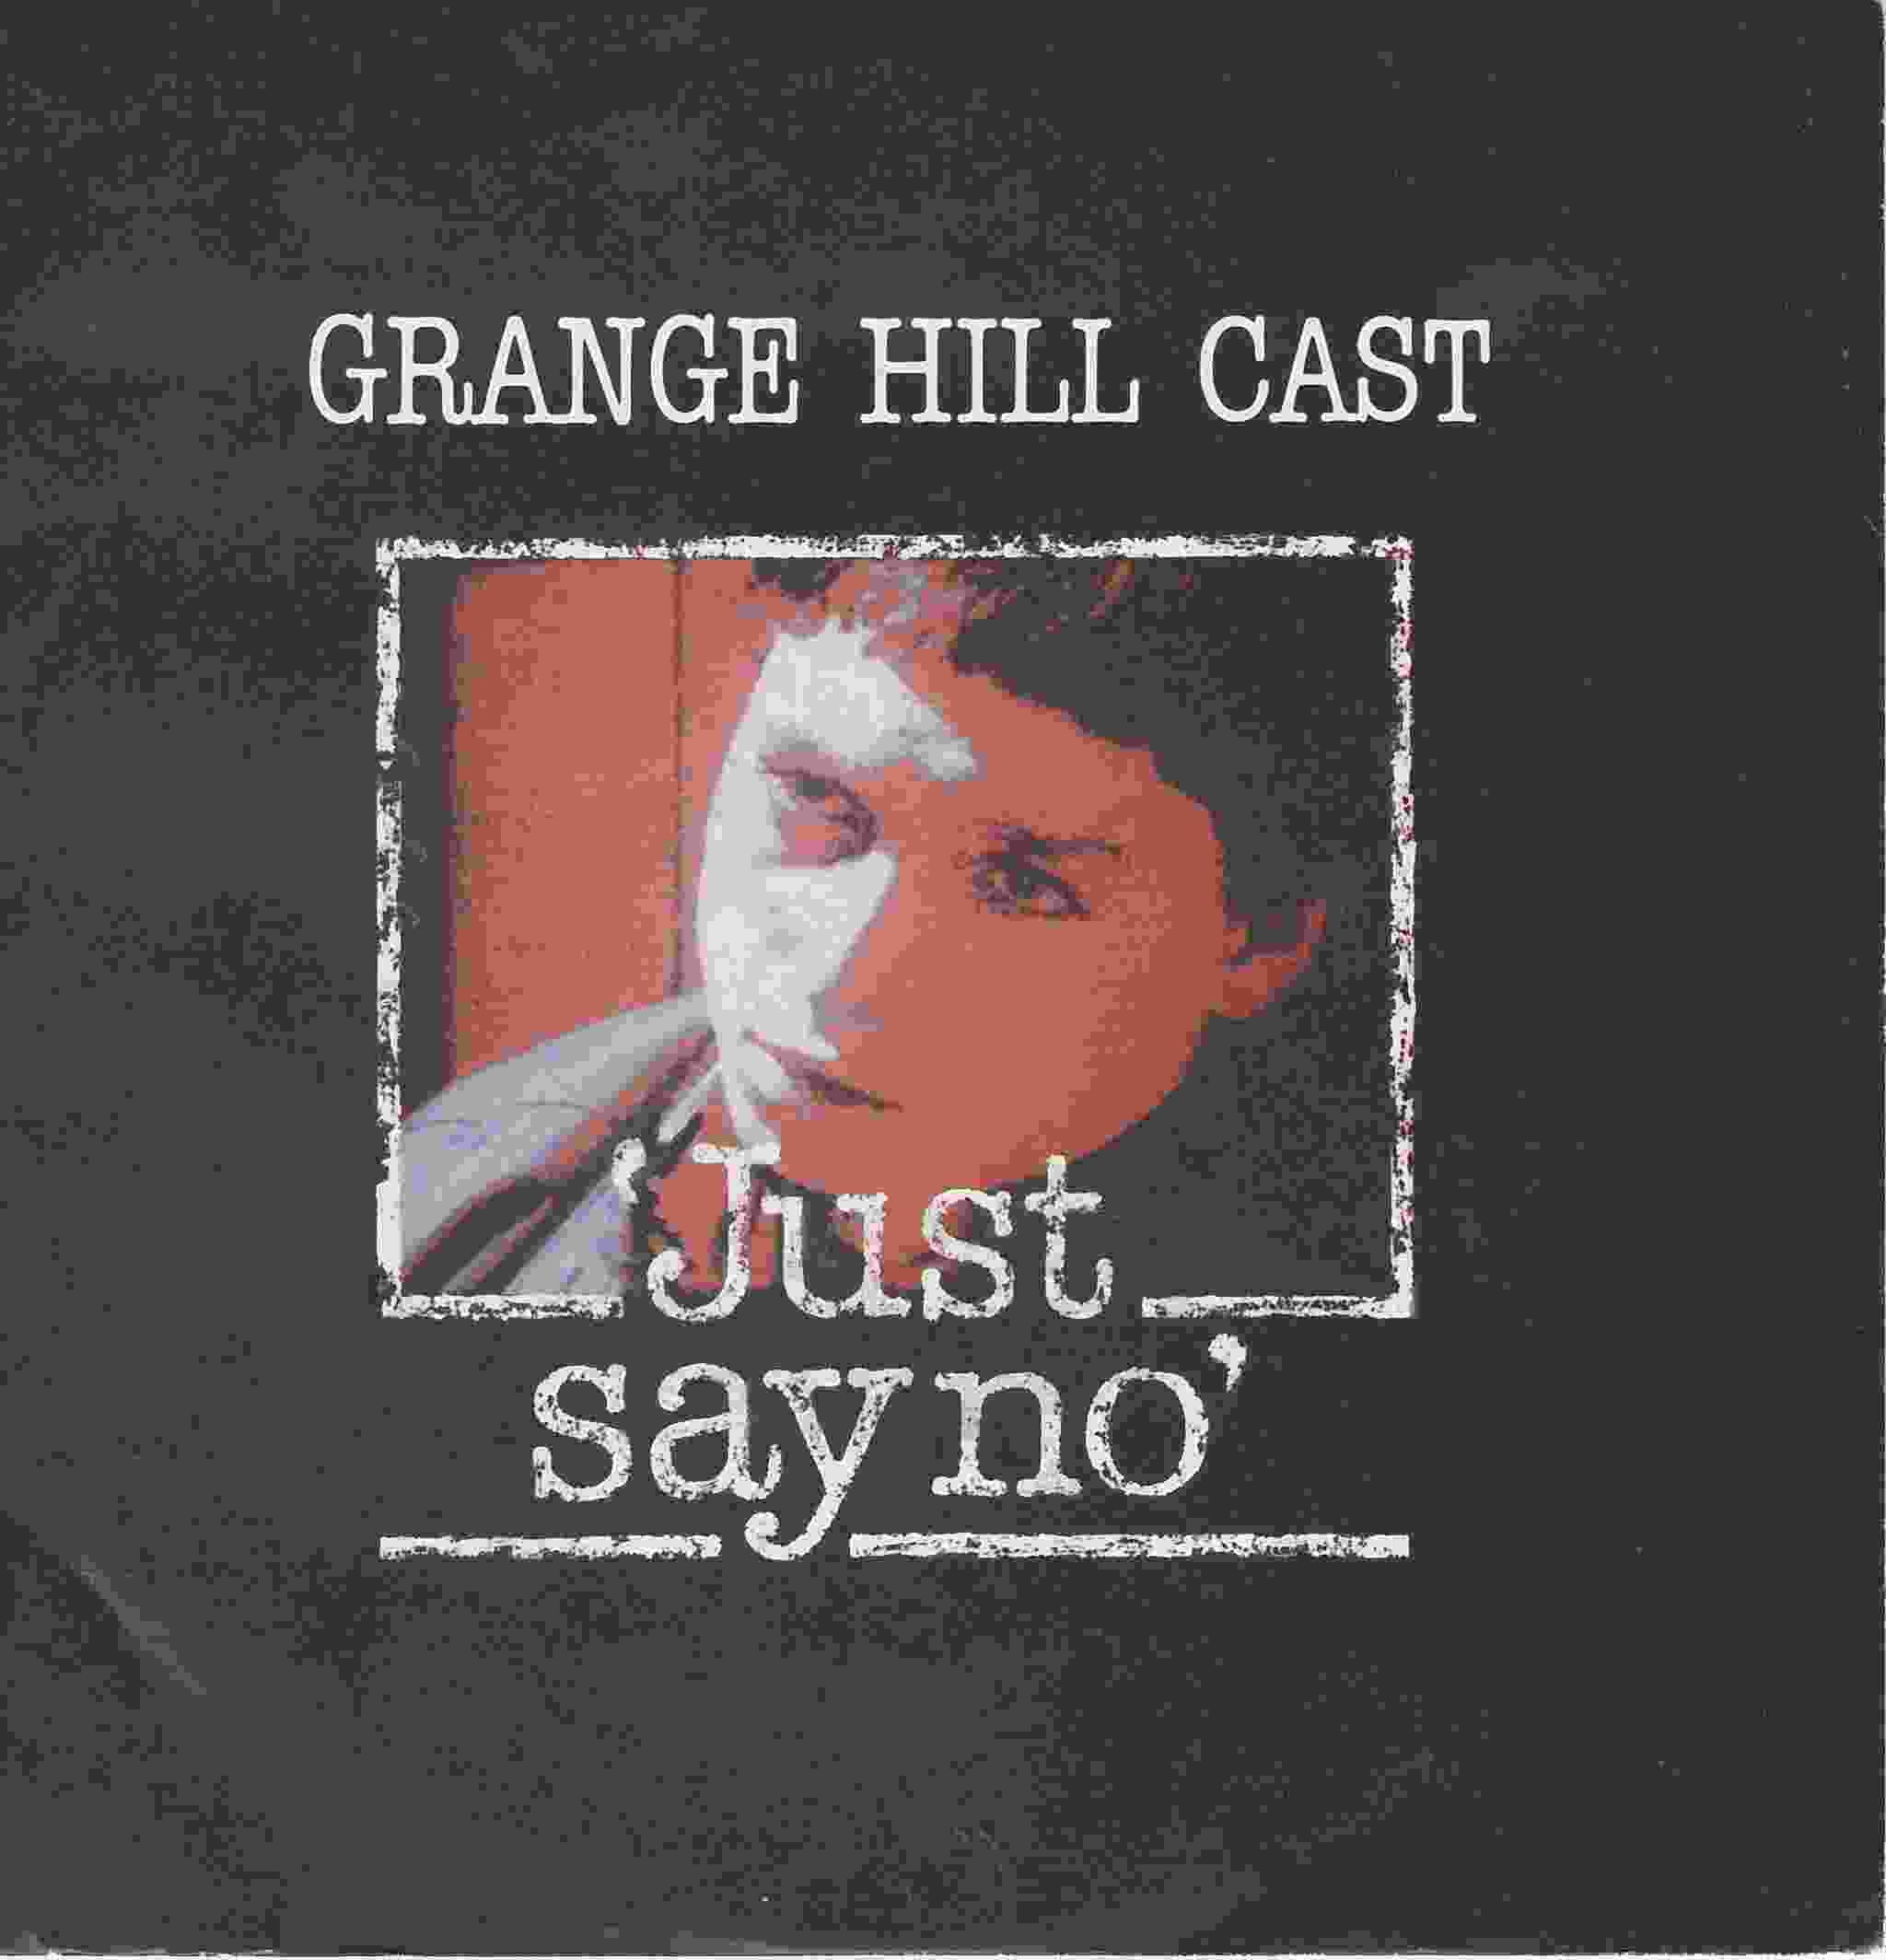 Picture of RESL 183 Just say no (Grange Hill) single by artist Grange Hill cast from the BBC records and Tapes library